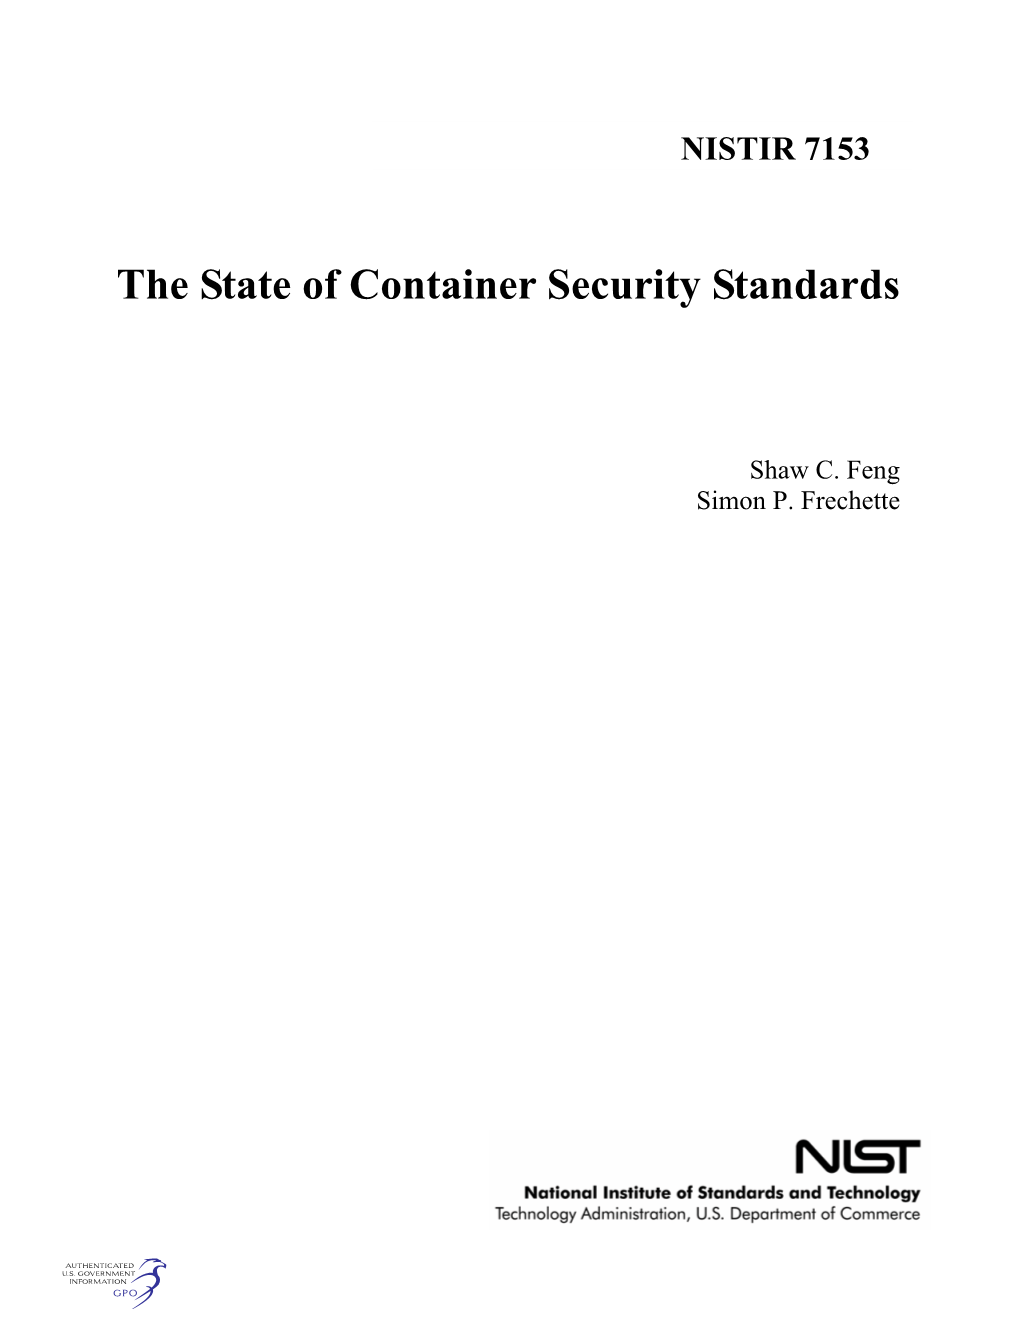 The State of Container Security Standards